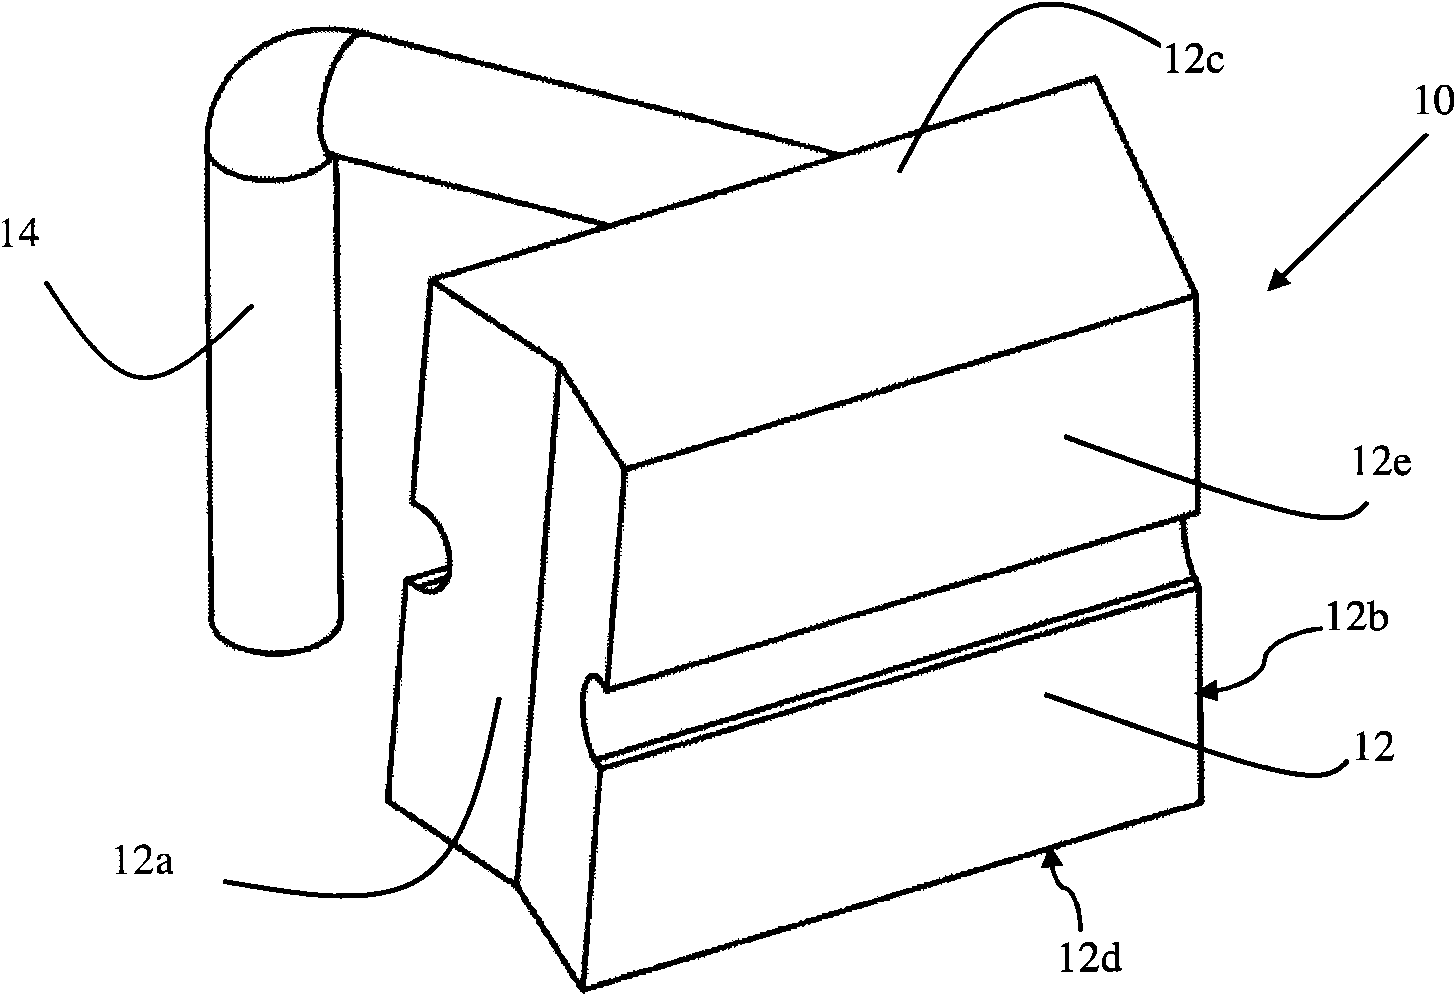 DC motor and carbon brush thereof